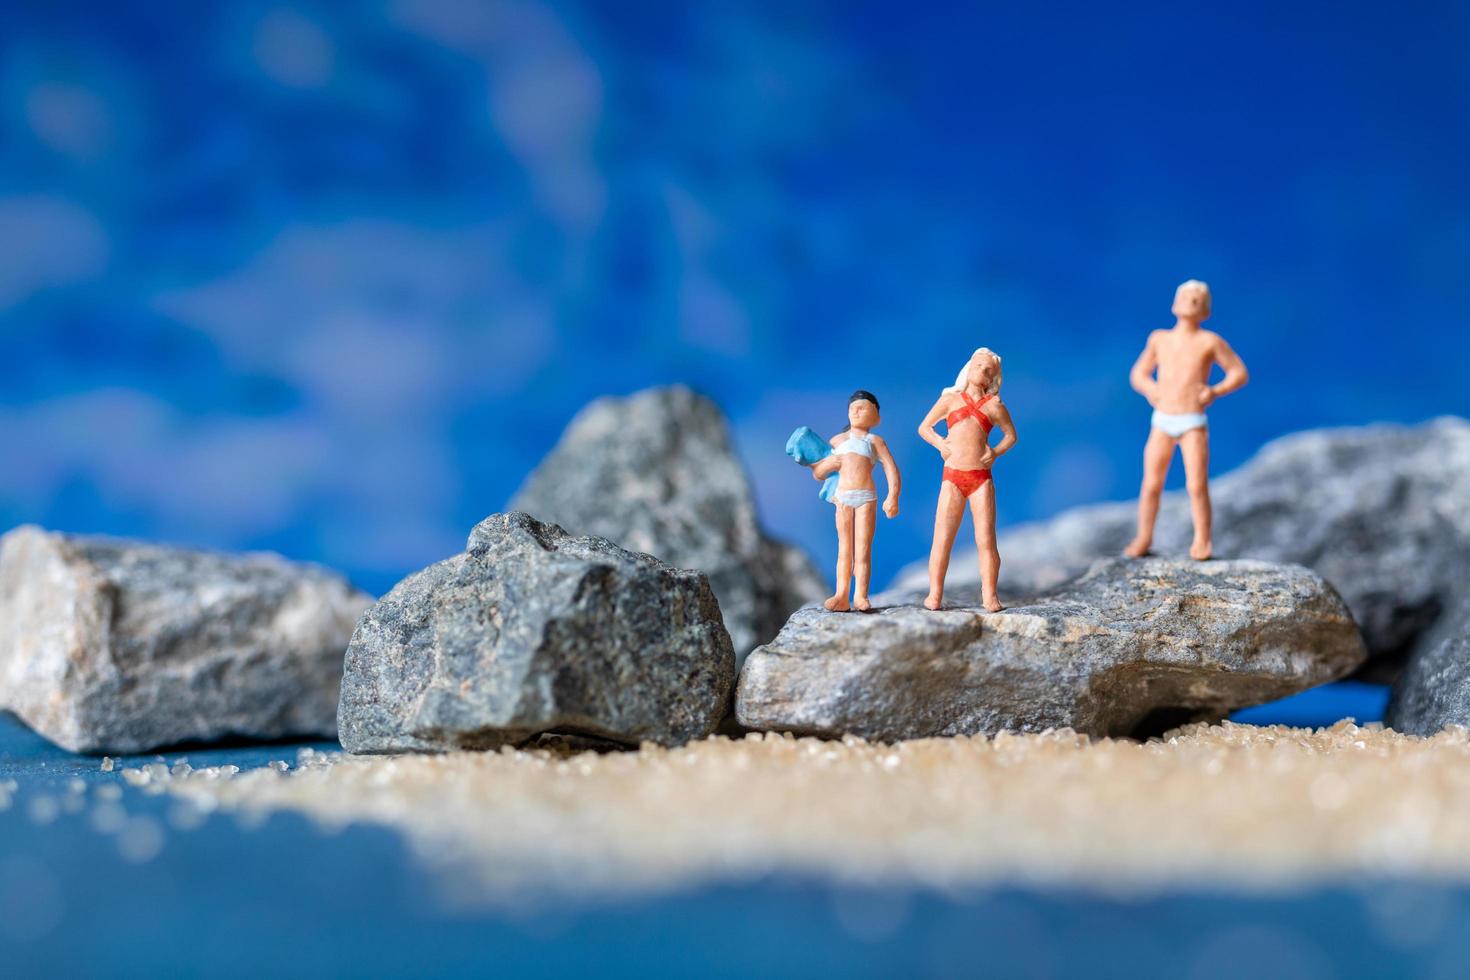 Miniature people wearing swimsuits relaxing on the beach with a blue background, summertime concept photo